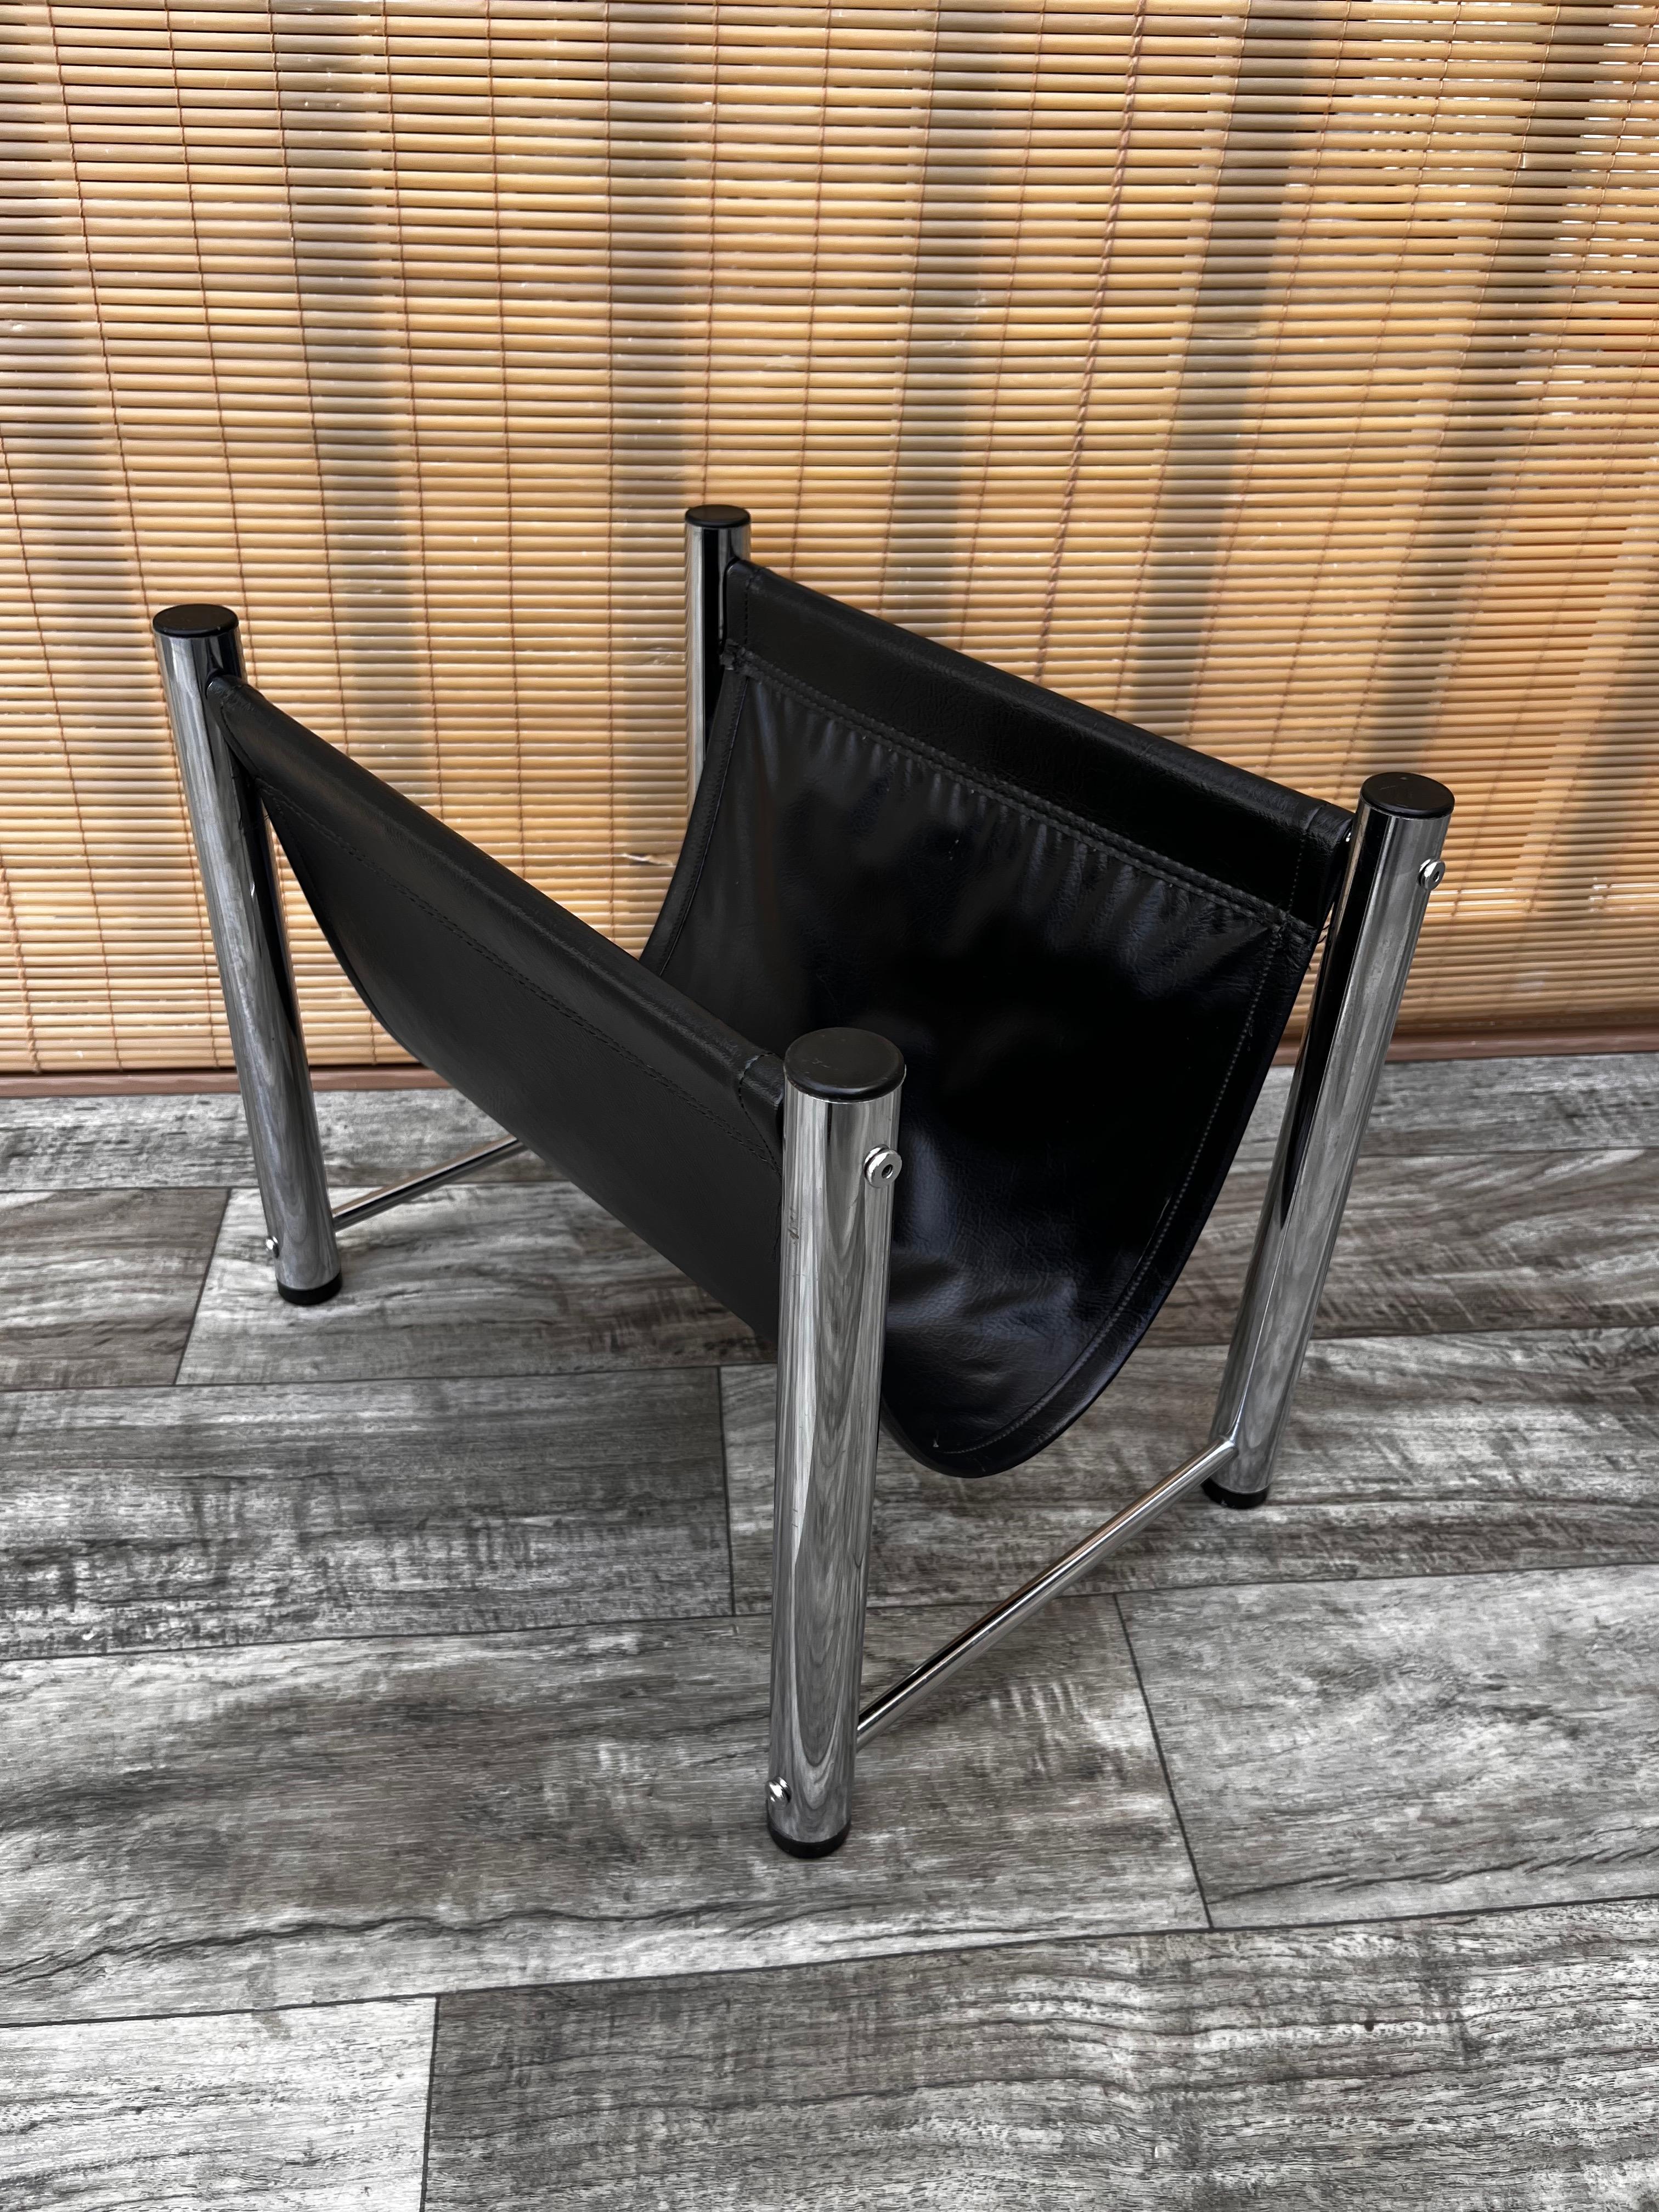 Vintage Mid-Century Modern chrome and black vinyl magazine rack in the Milo Baughman Style. C 1970s
Features a quintessential 1970s design with four tubular chrome legs and a black vinyl sling to hold the magazines.
In excellent near mint original